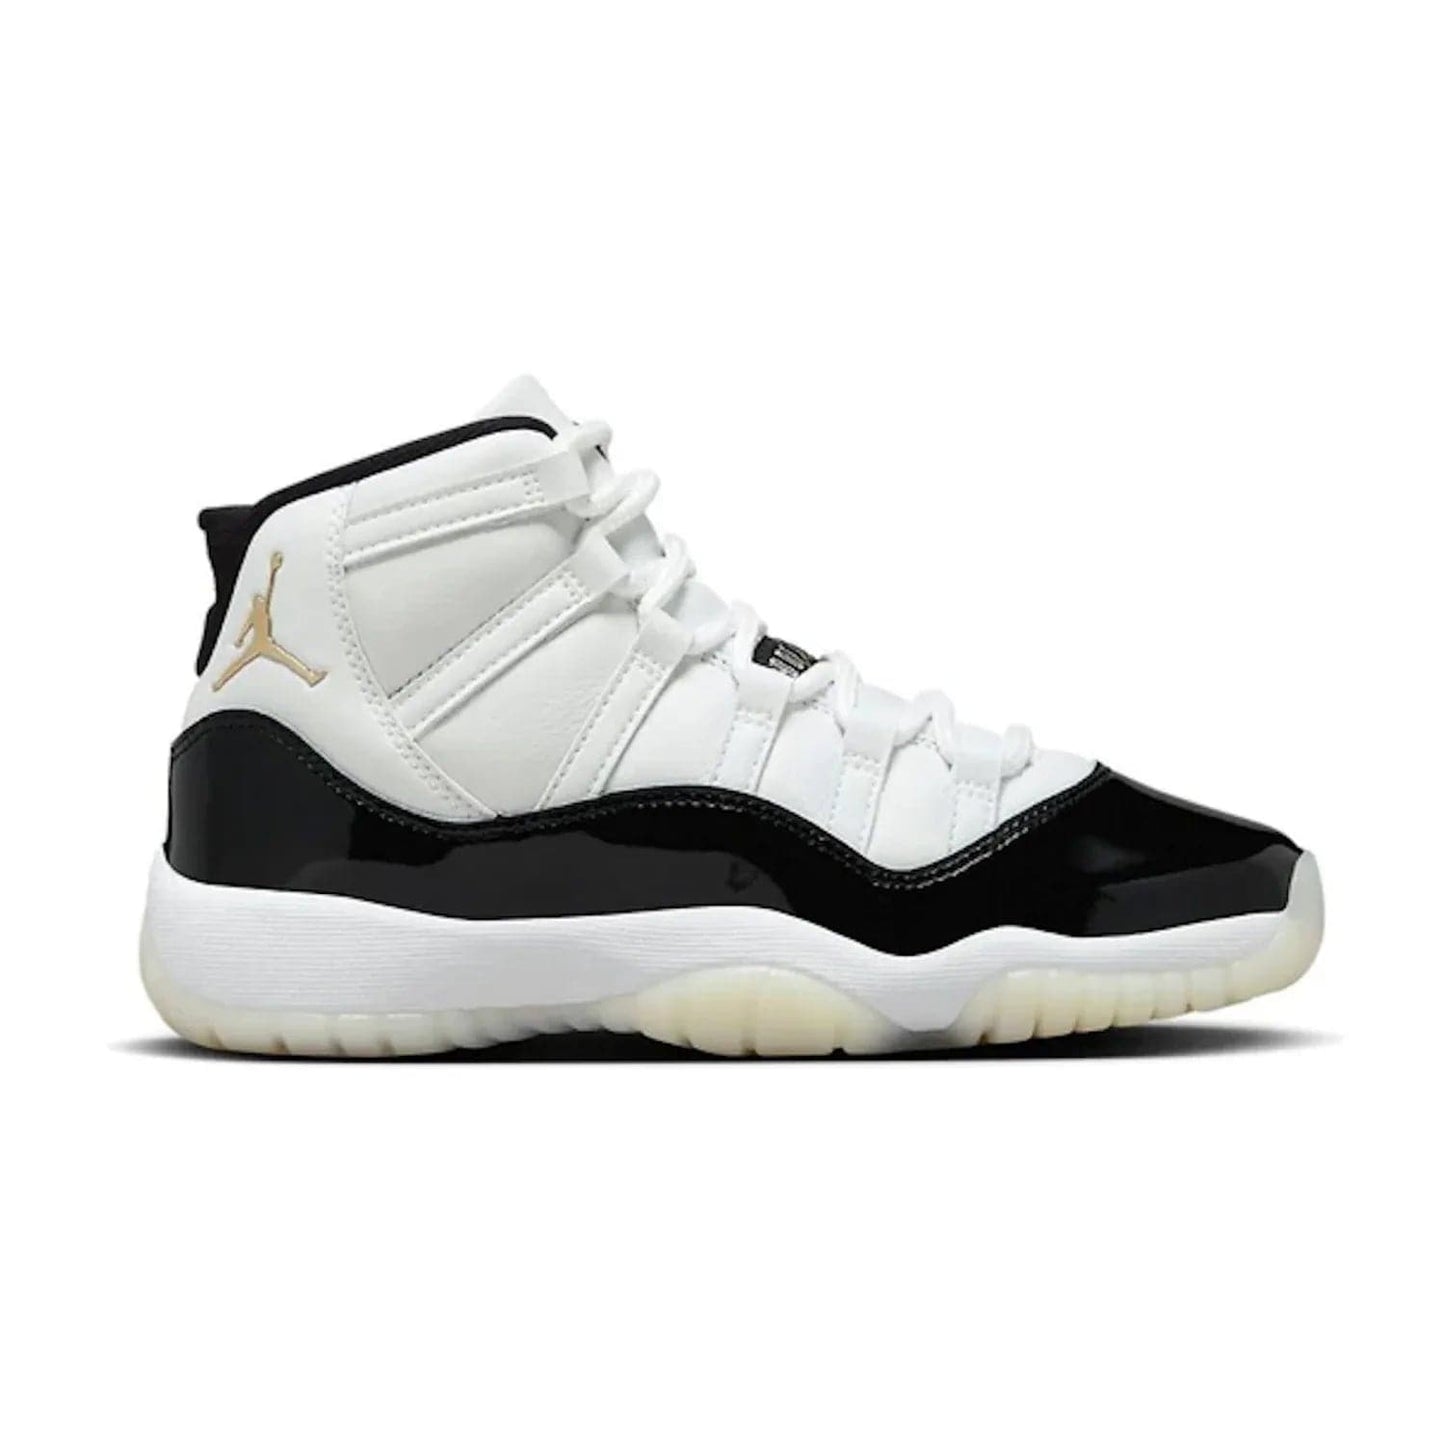 Jordan 11 Retro DMP Gratitude (2023) (GS) - Image 1 - Only at www.BallersClubKickz.com - Jordan 11 Retro DMP Defining Moments (GS): 2023 sneaker for the style enthusiast w/ Black/White/Metallic Gold colorway, patent leather and gold accents. In stores Dec 9, price $185. Get ready for next level style and championship-winning looks!